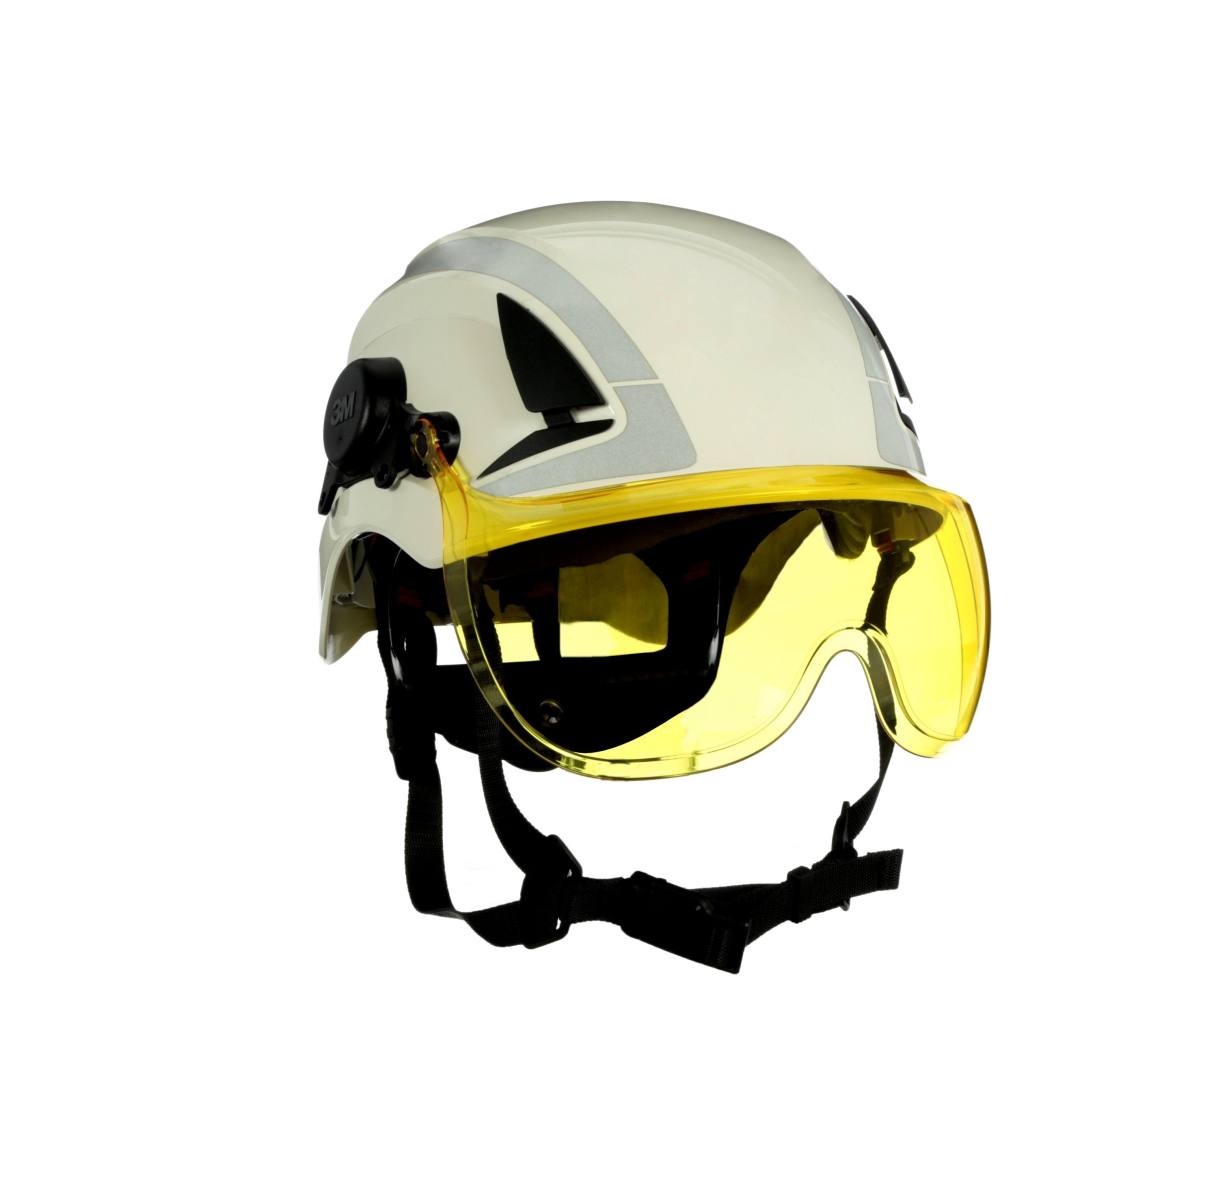 3M short visor X5-SV03-CE for safety helmets X5000 and X5500, yellow, anti-fog and anti-scratch coating, polycarbonate